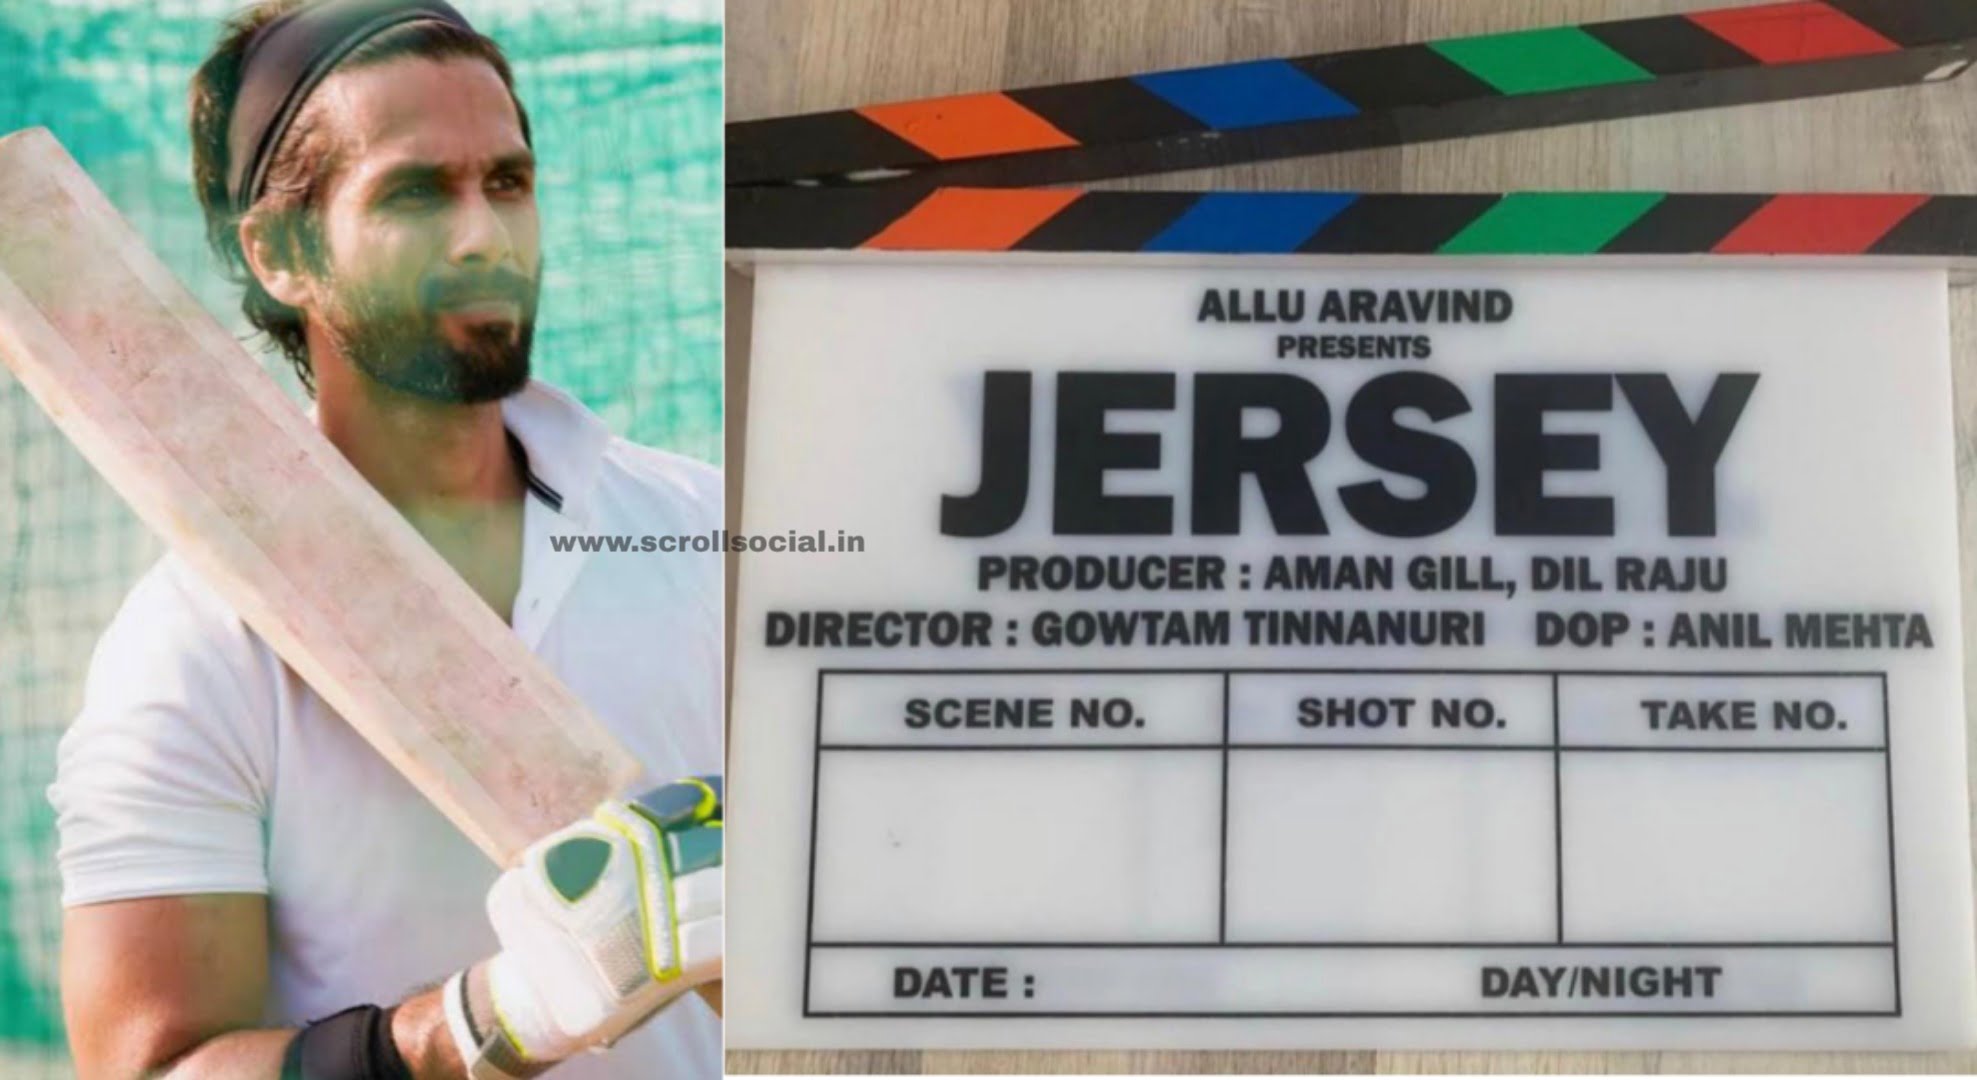 Jersey Hindi Remake: Shahid Kapoor is playing the role of Cricketer, Jersey a remake of Telugu movie.